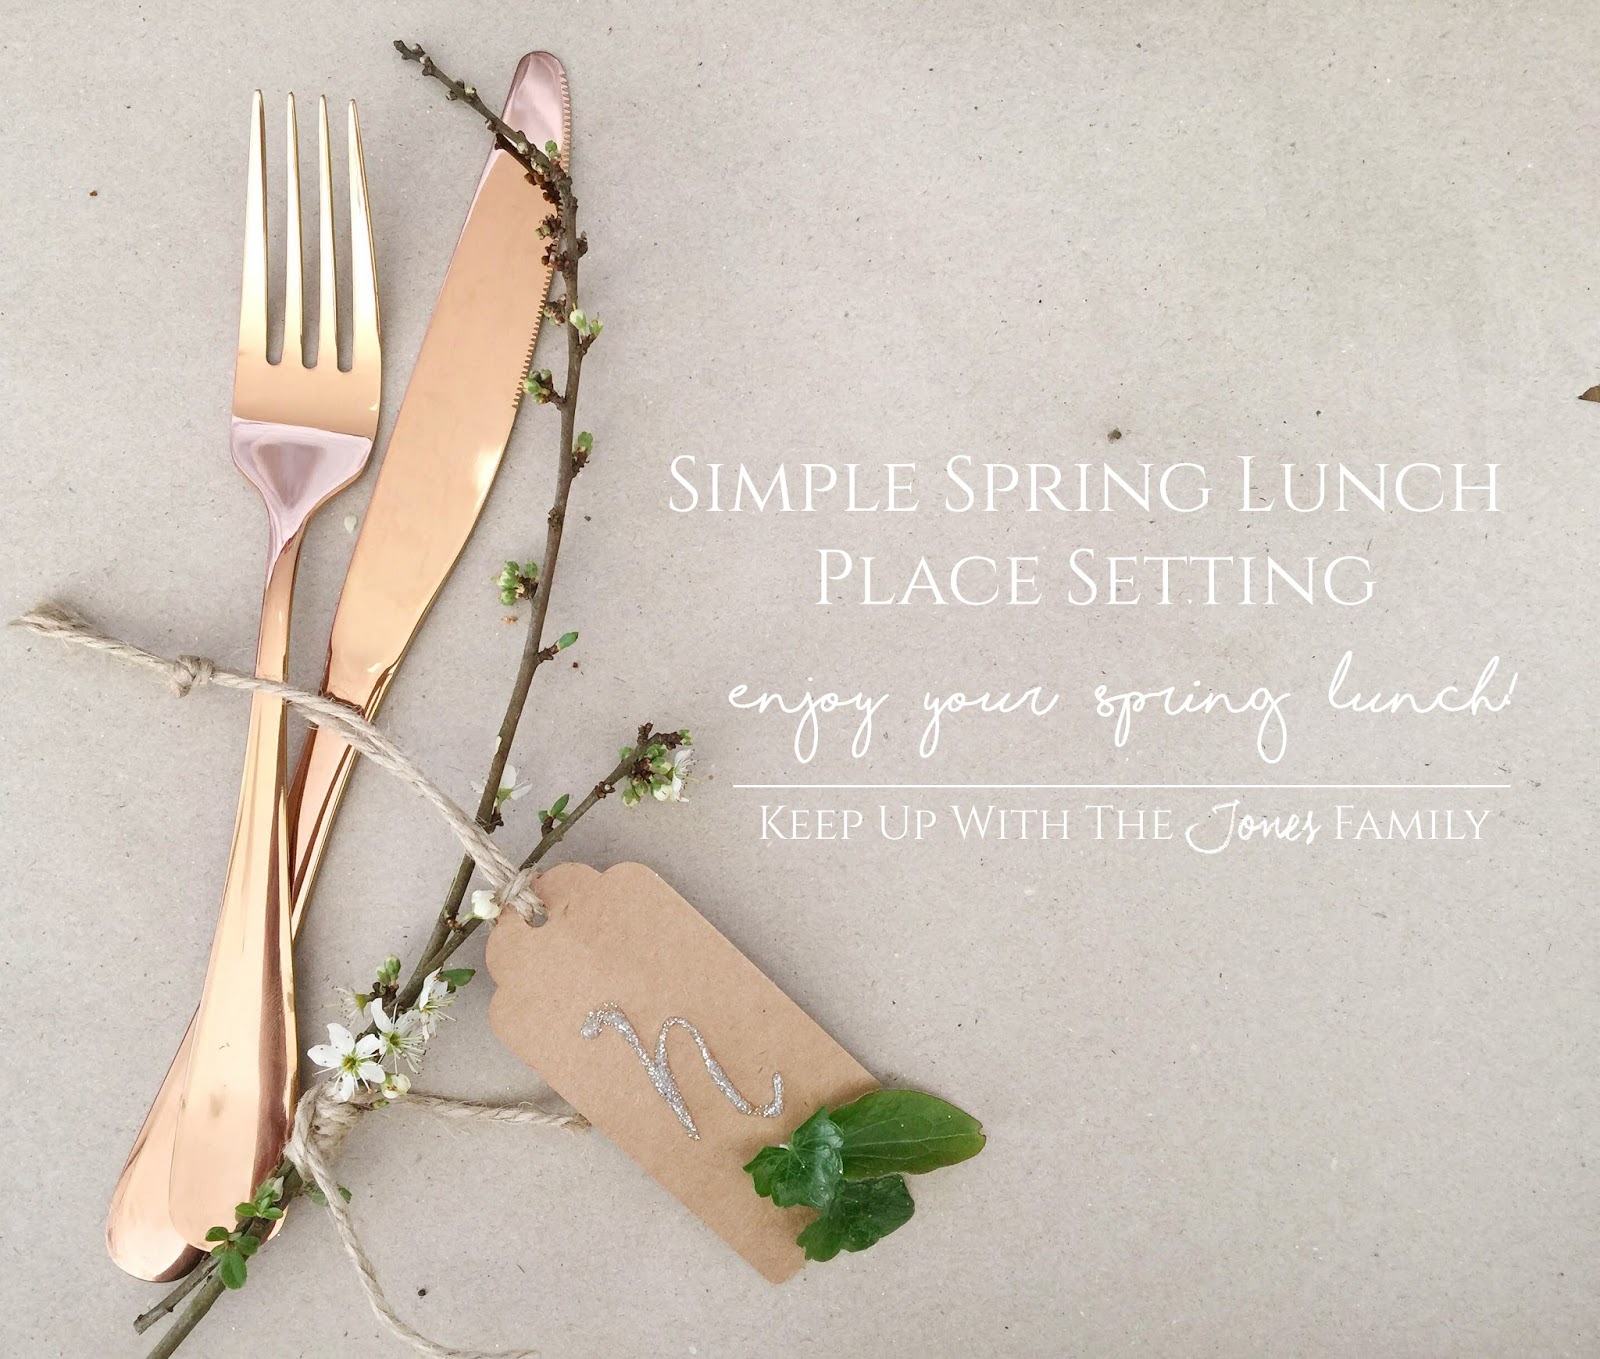 SPRING LUNCHES: SIMPLE PLACE SETTINGS